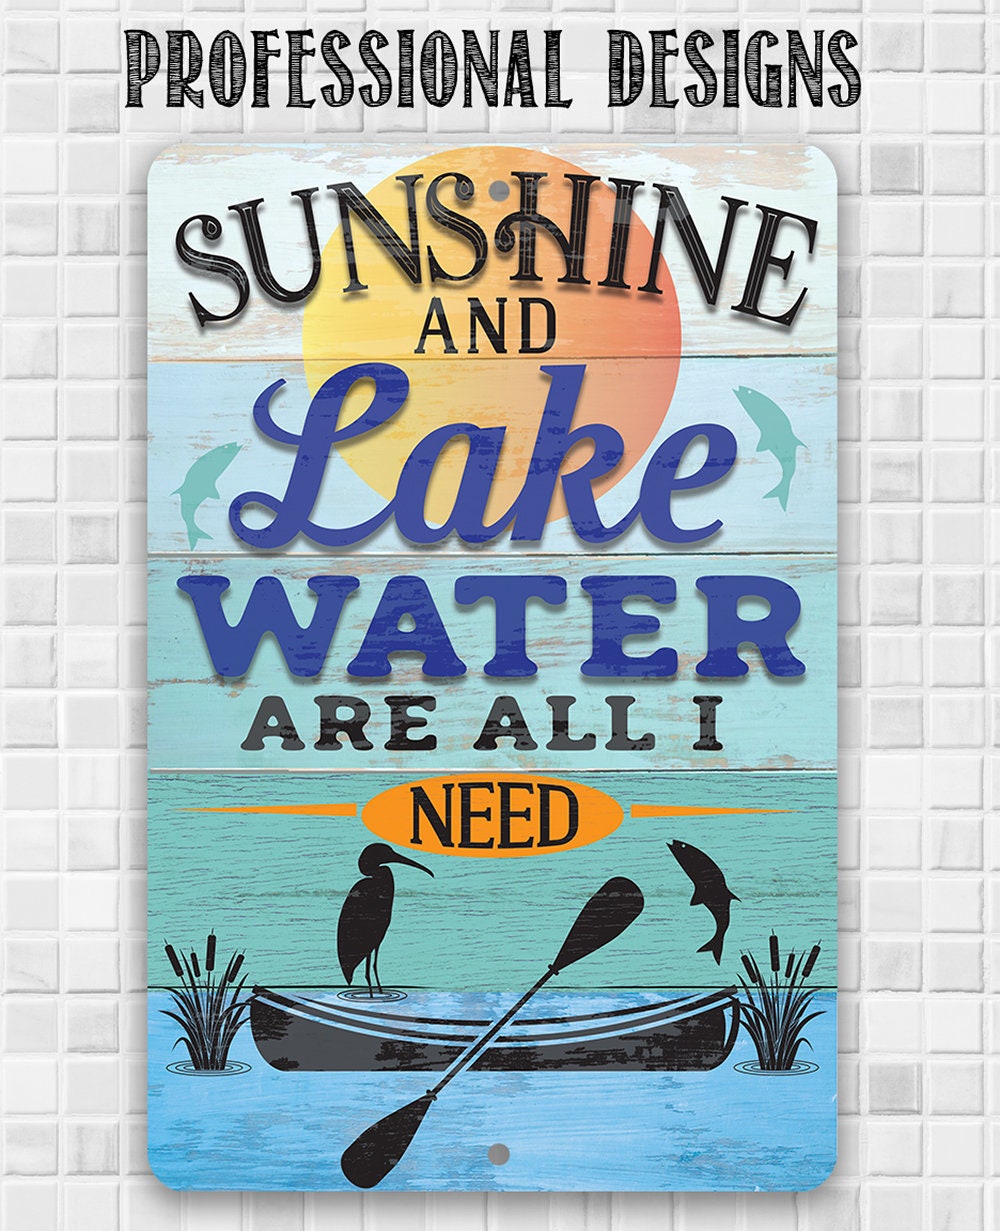 Sunshine and Lake Water Are All I Need - Metal Sign Metal Sign Lone Star Art 